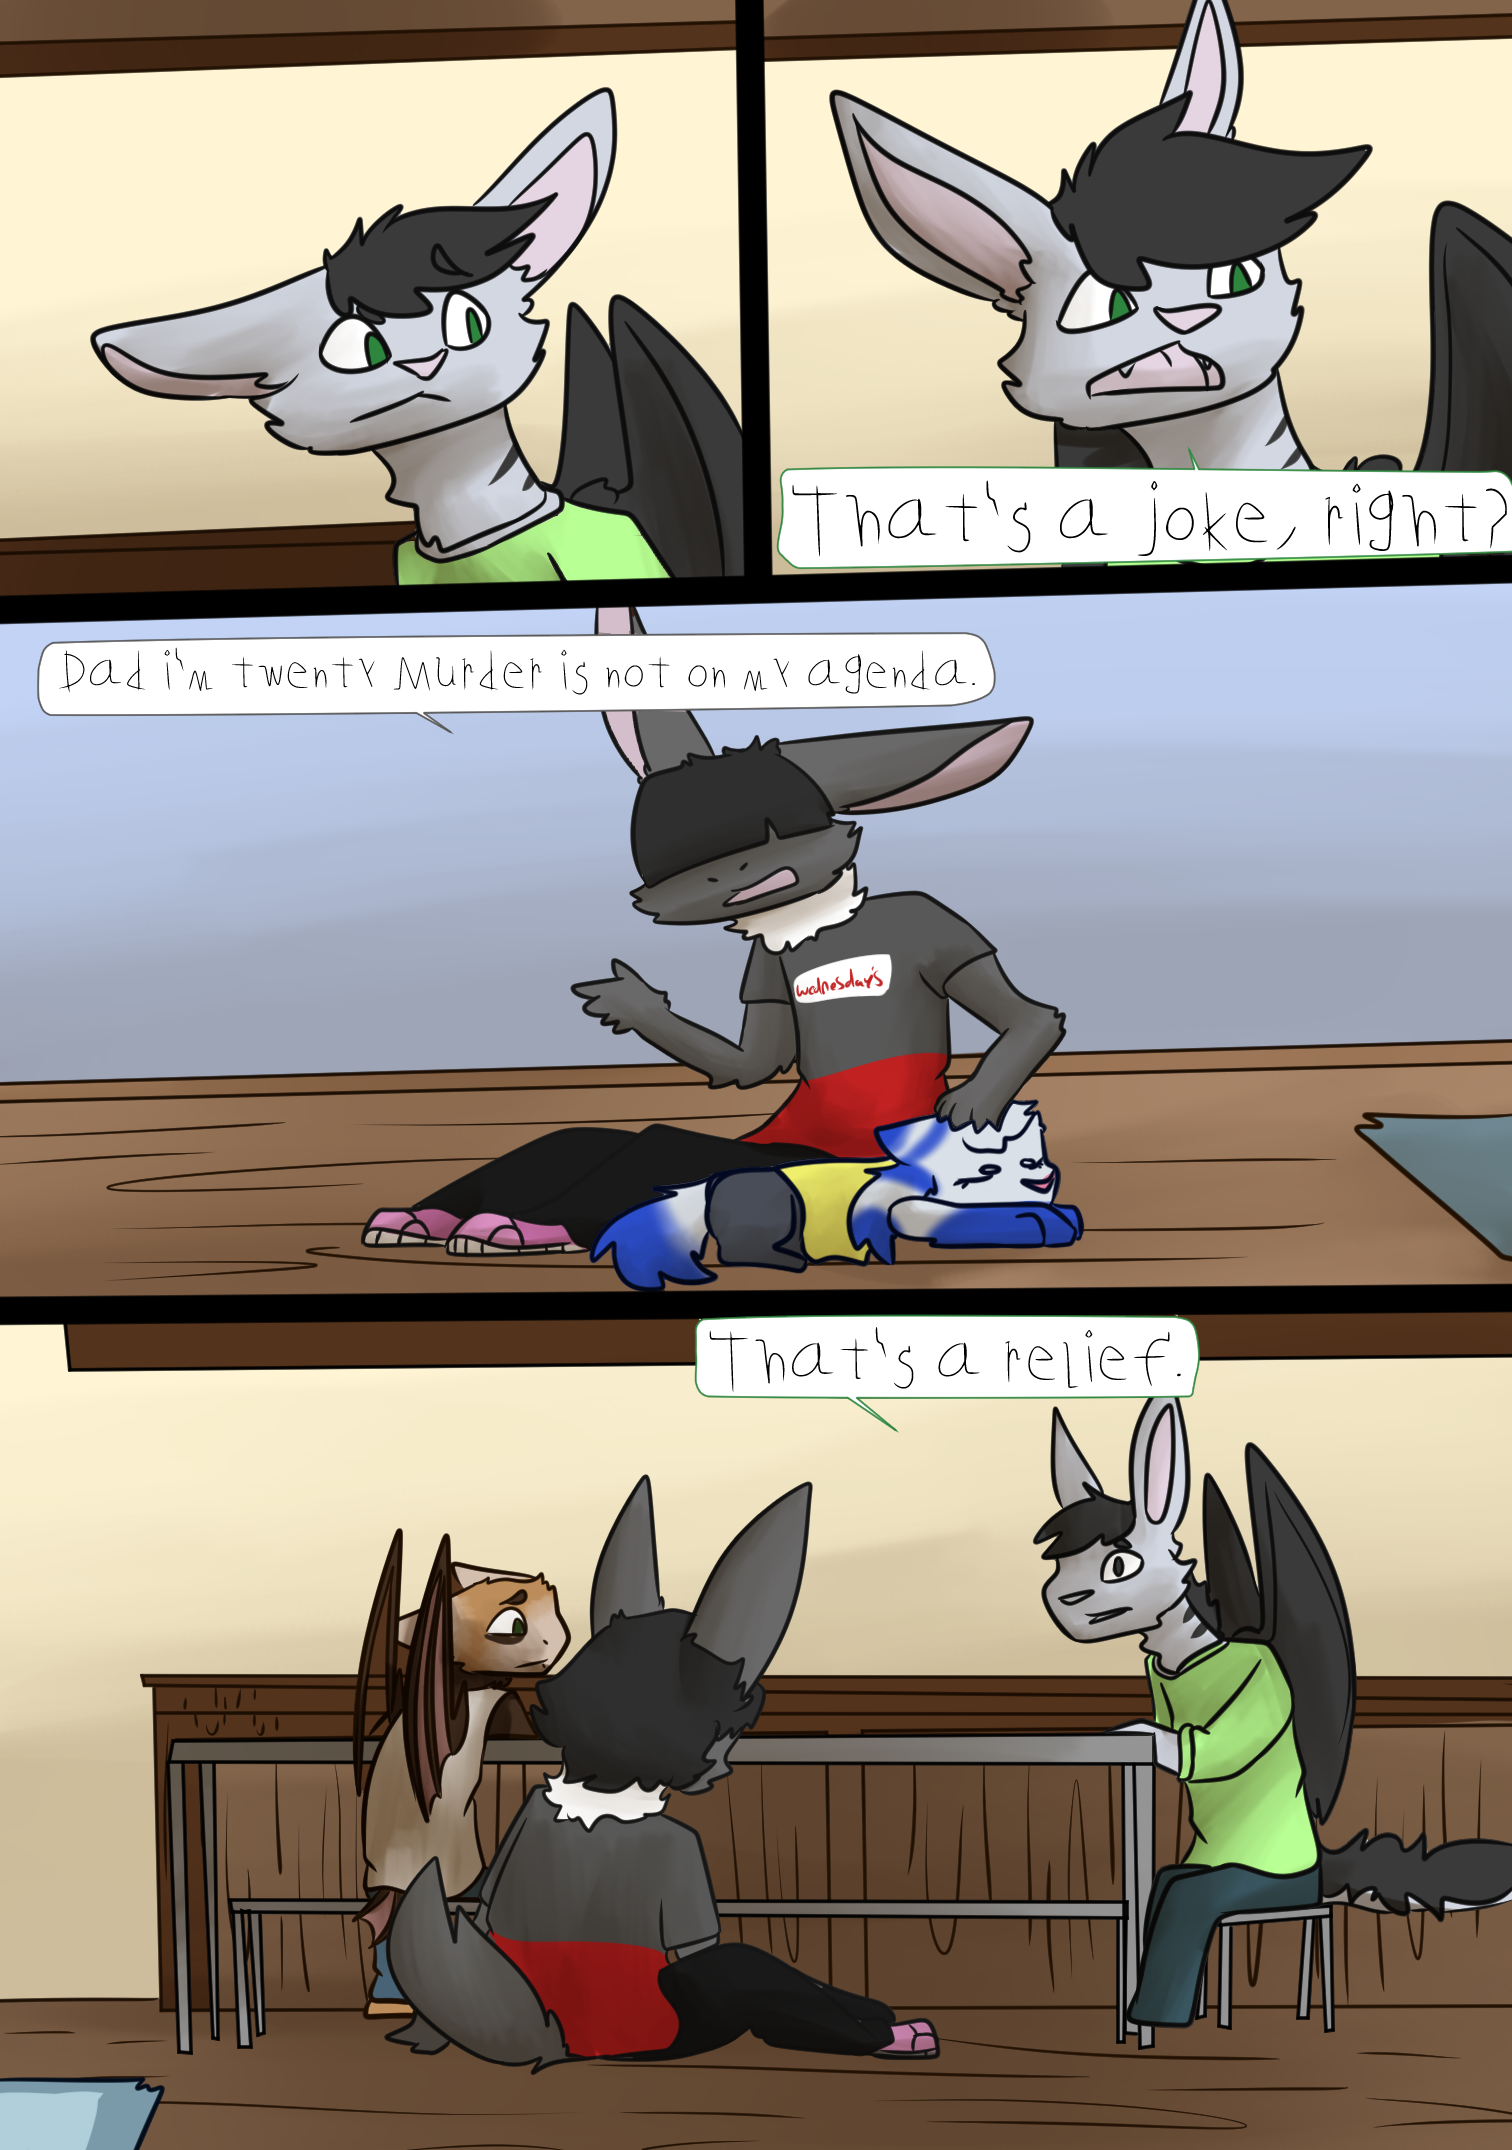 page 24 - Not murder